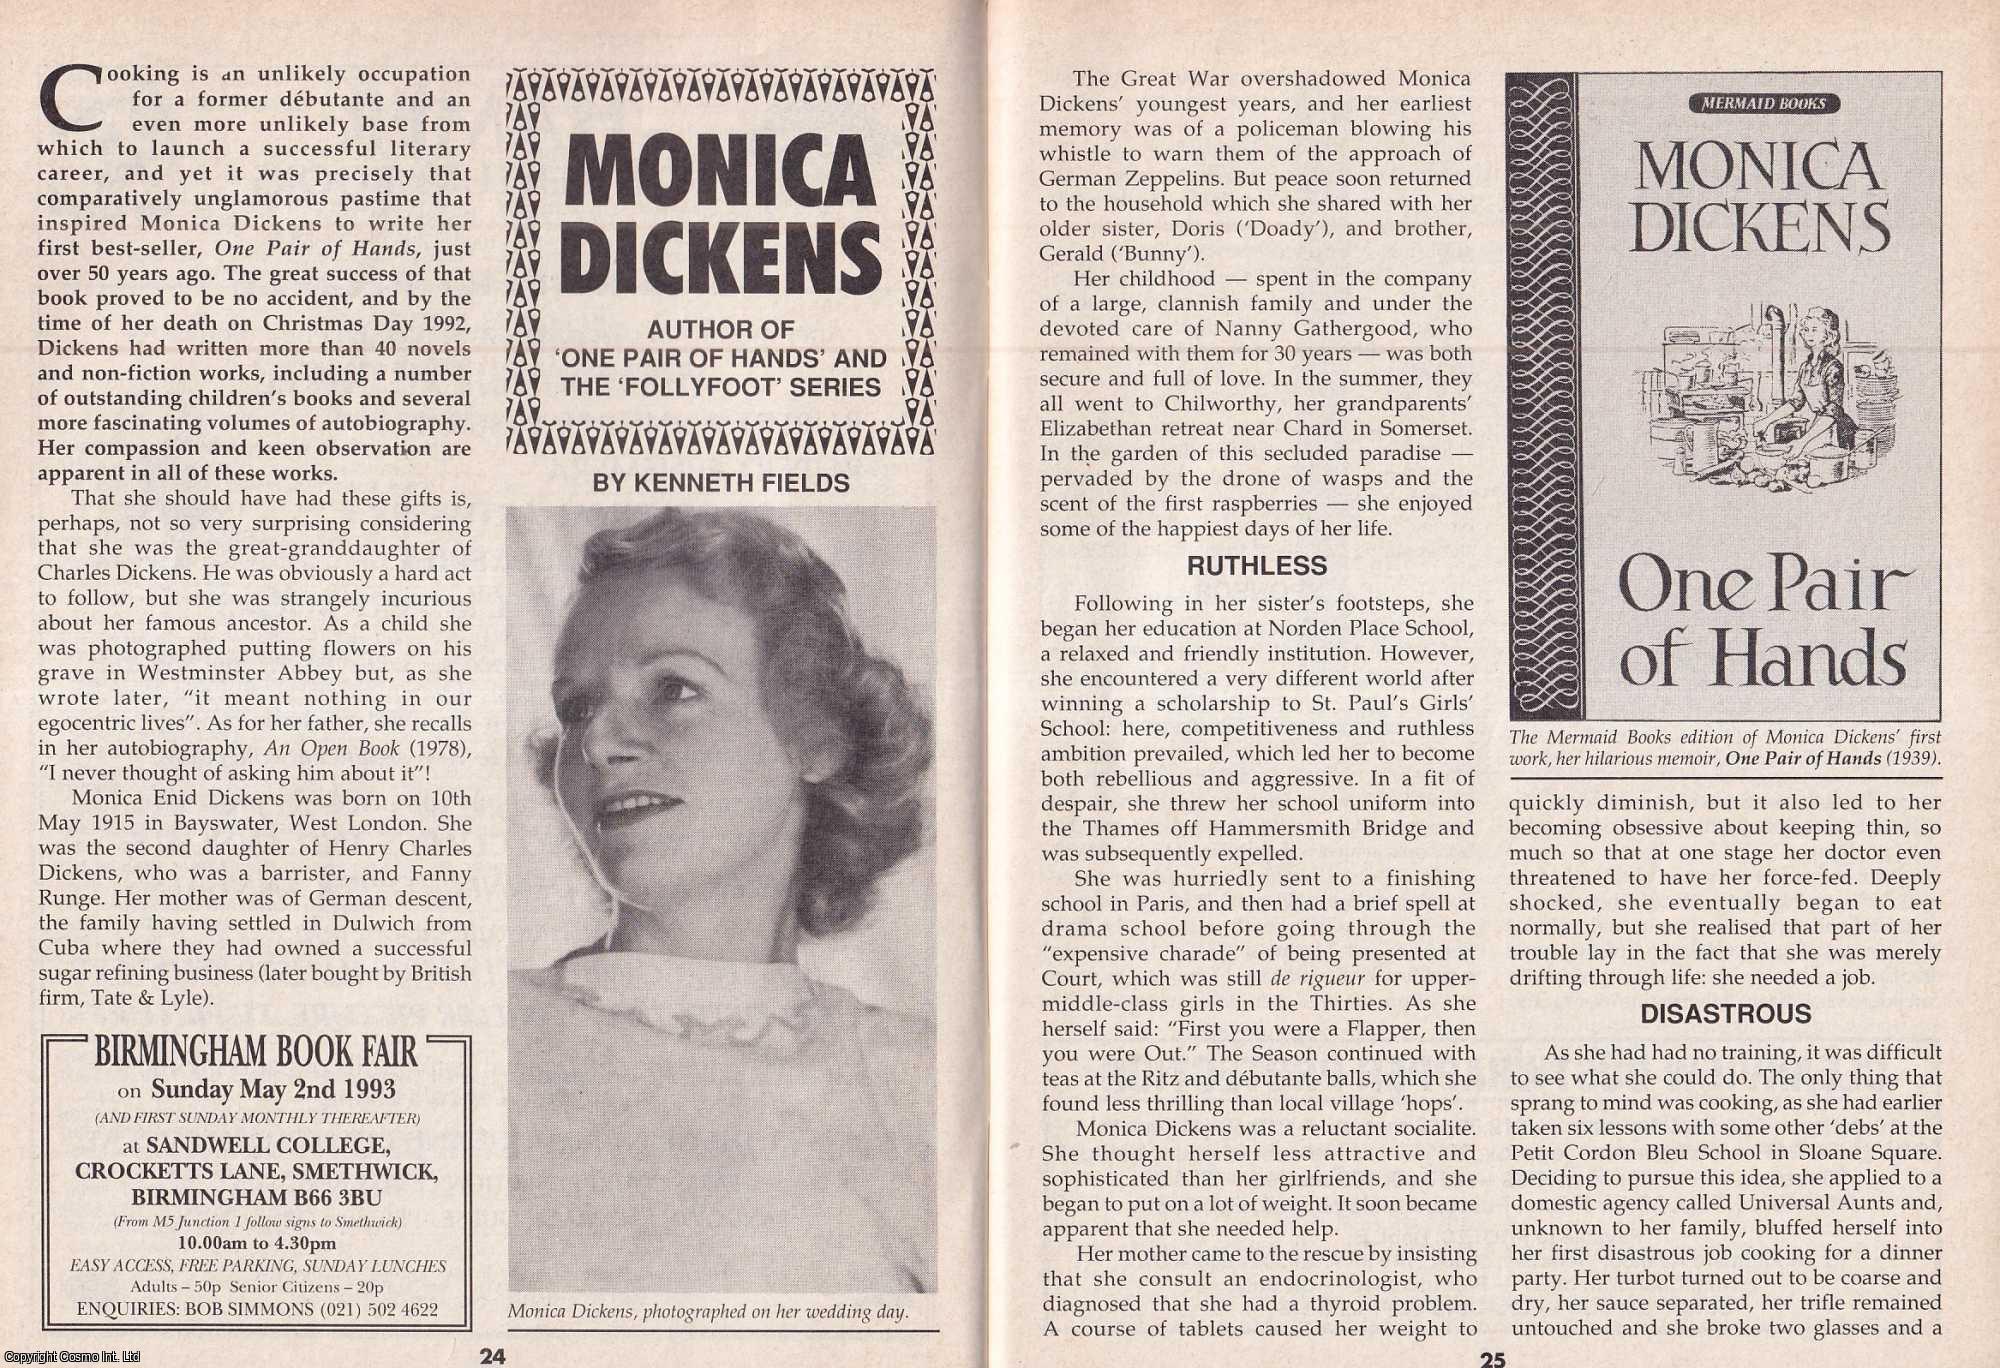 Kenneth Fields - Monica Dickens. Author of One Pair of Hands. This is an original article separated from an issue of The Book & Magazine Collector publication, 1993.